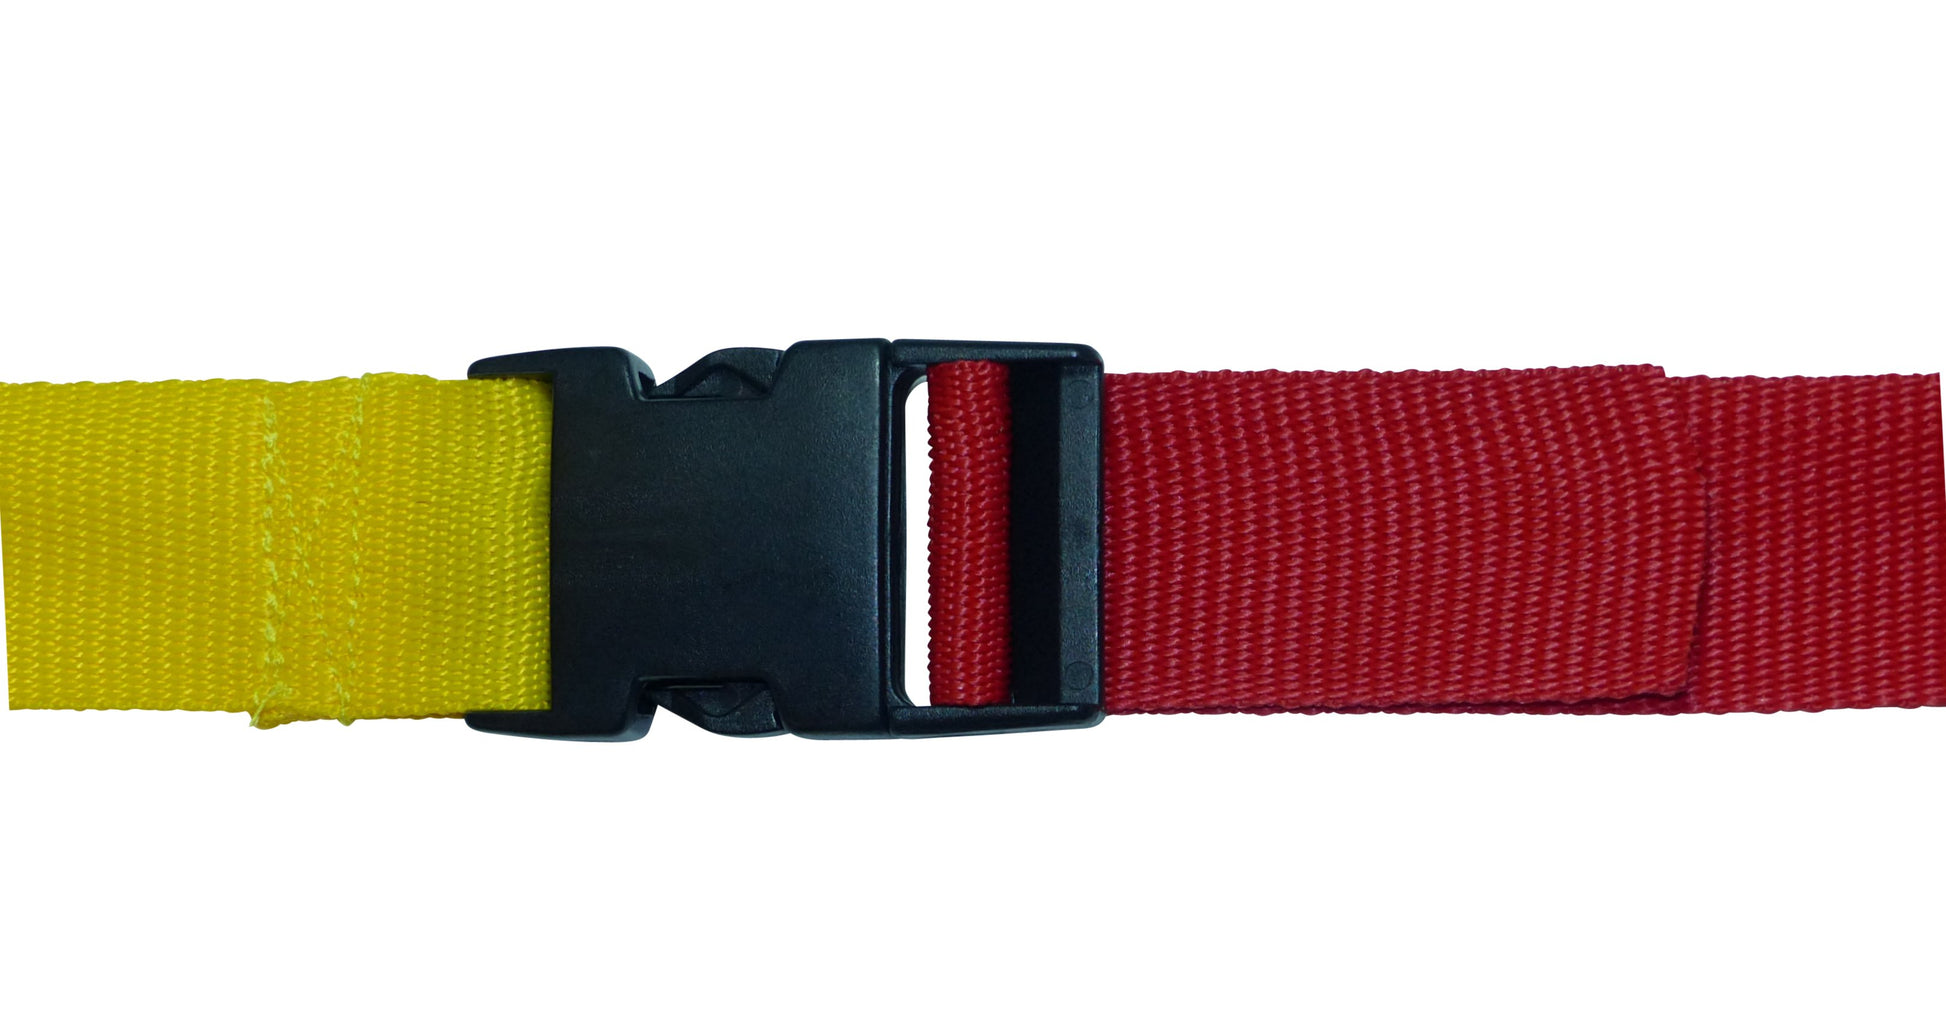 Benristraps 25mm plastic quick release buckle on webbing